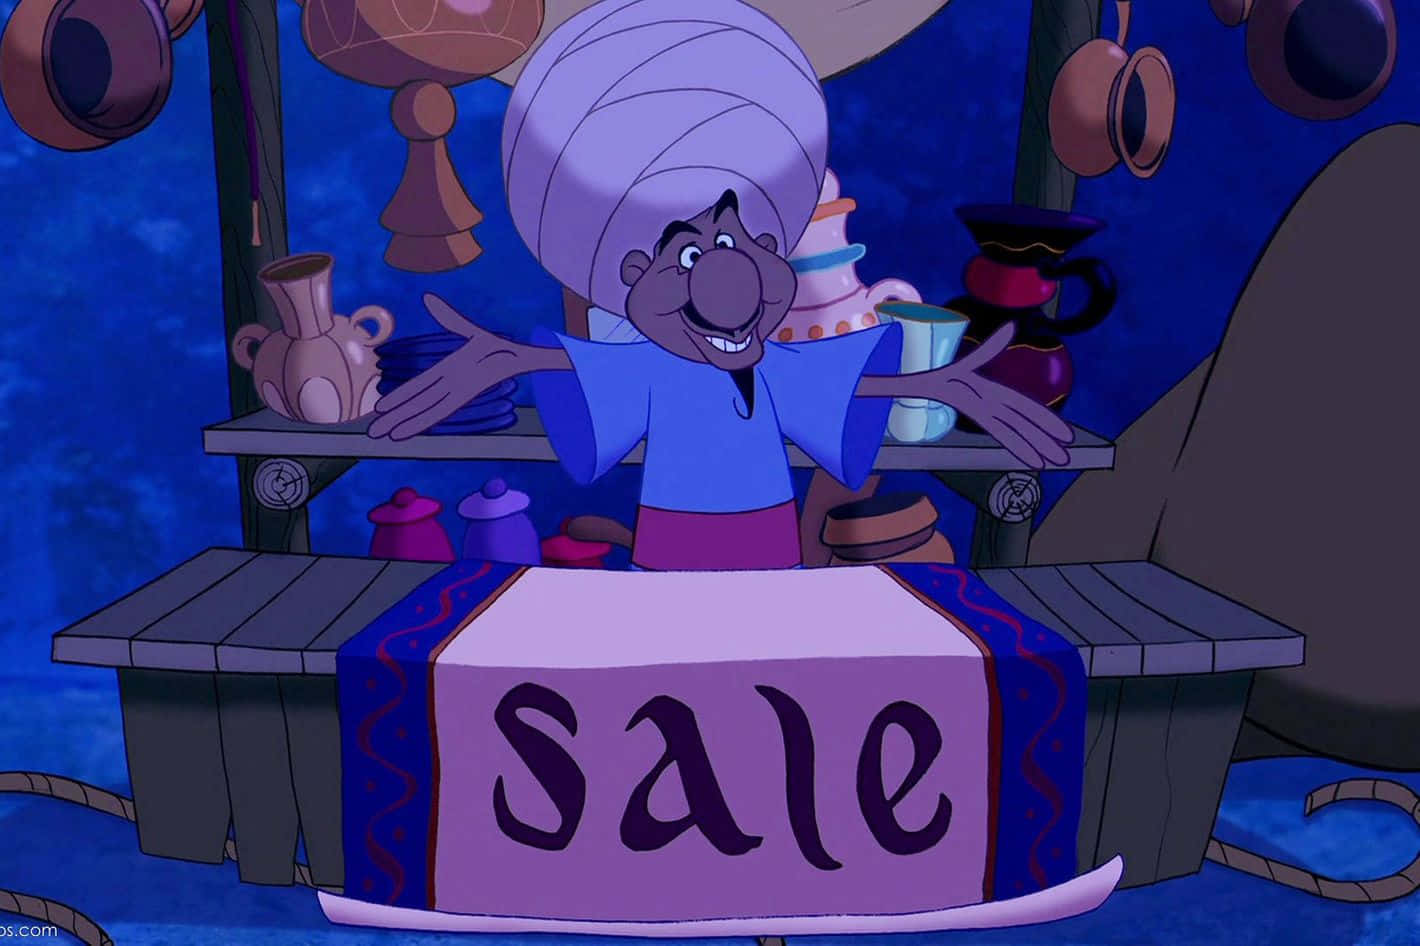 Disney's Aladdin in a magical moment in Agrabah